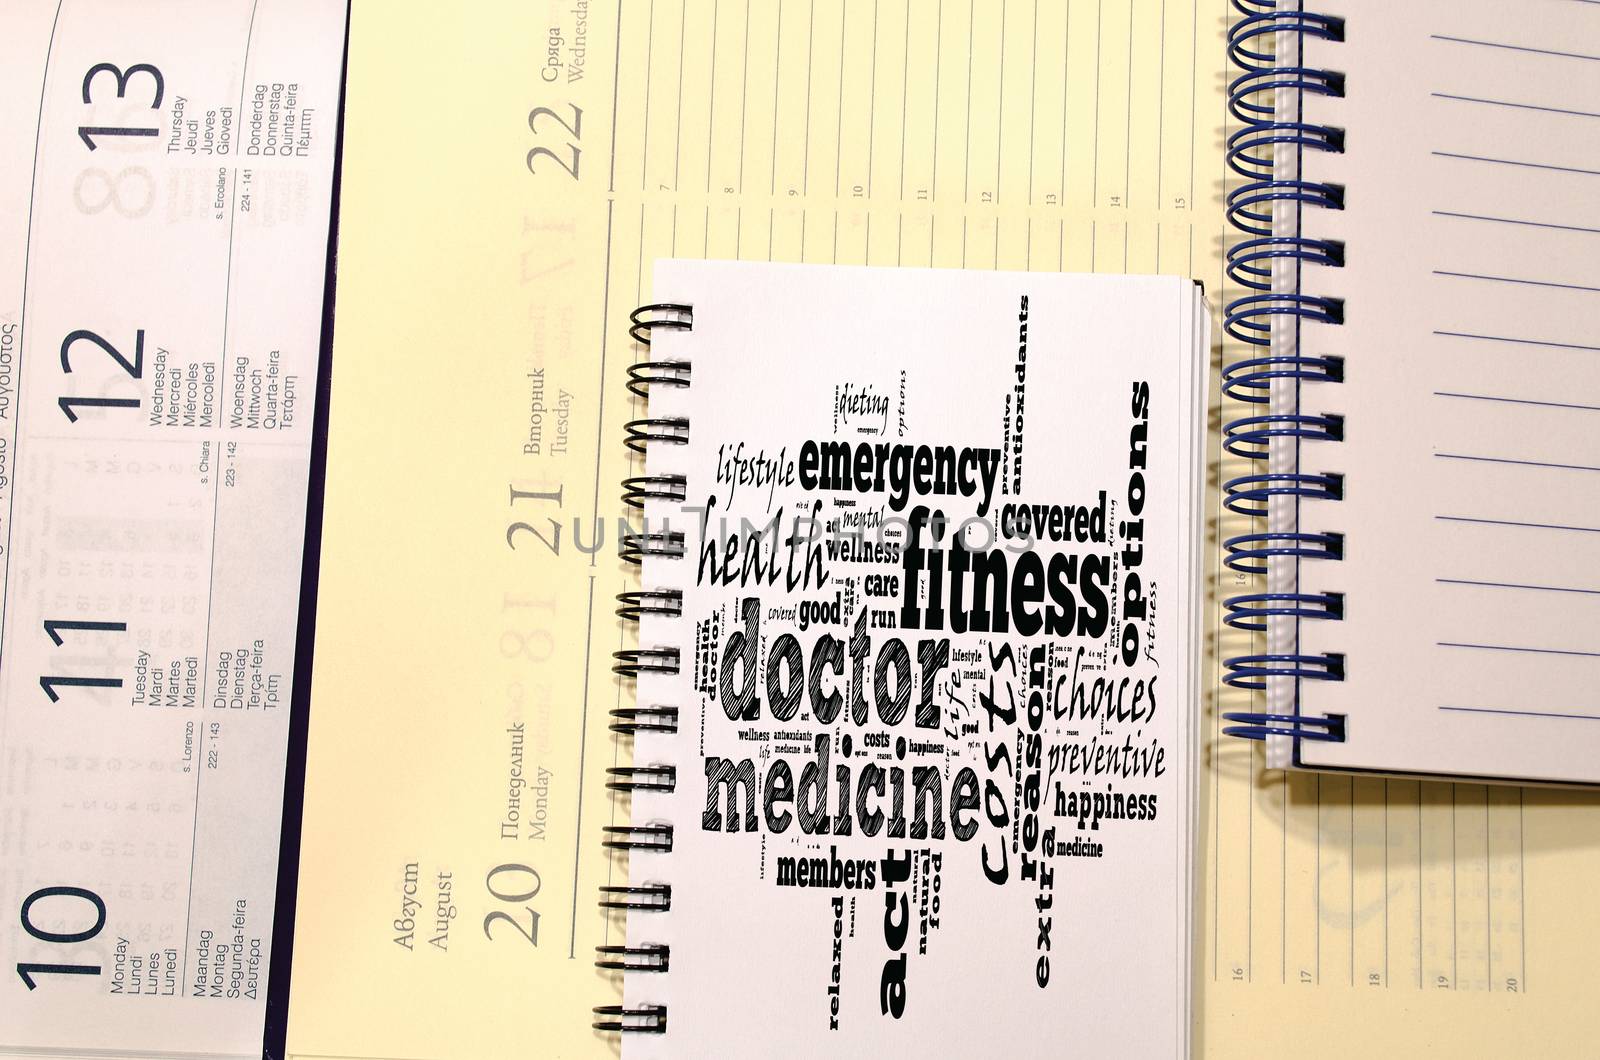 Doctor word cloud collage over notepad background